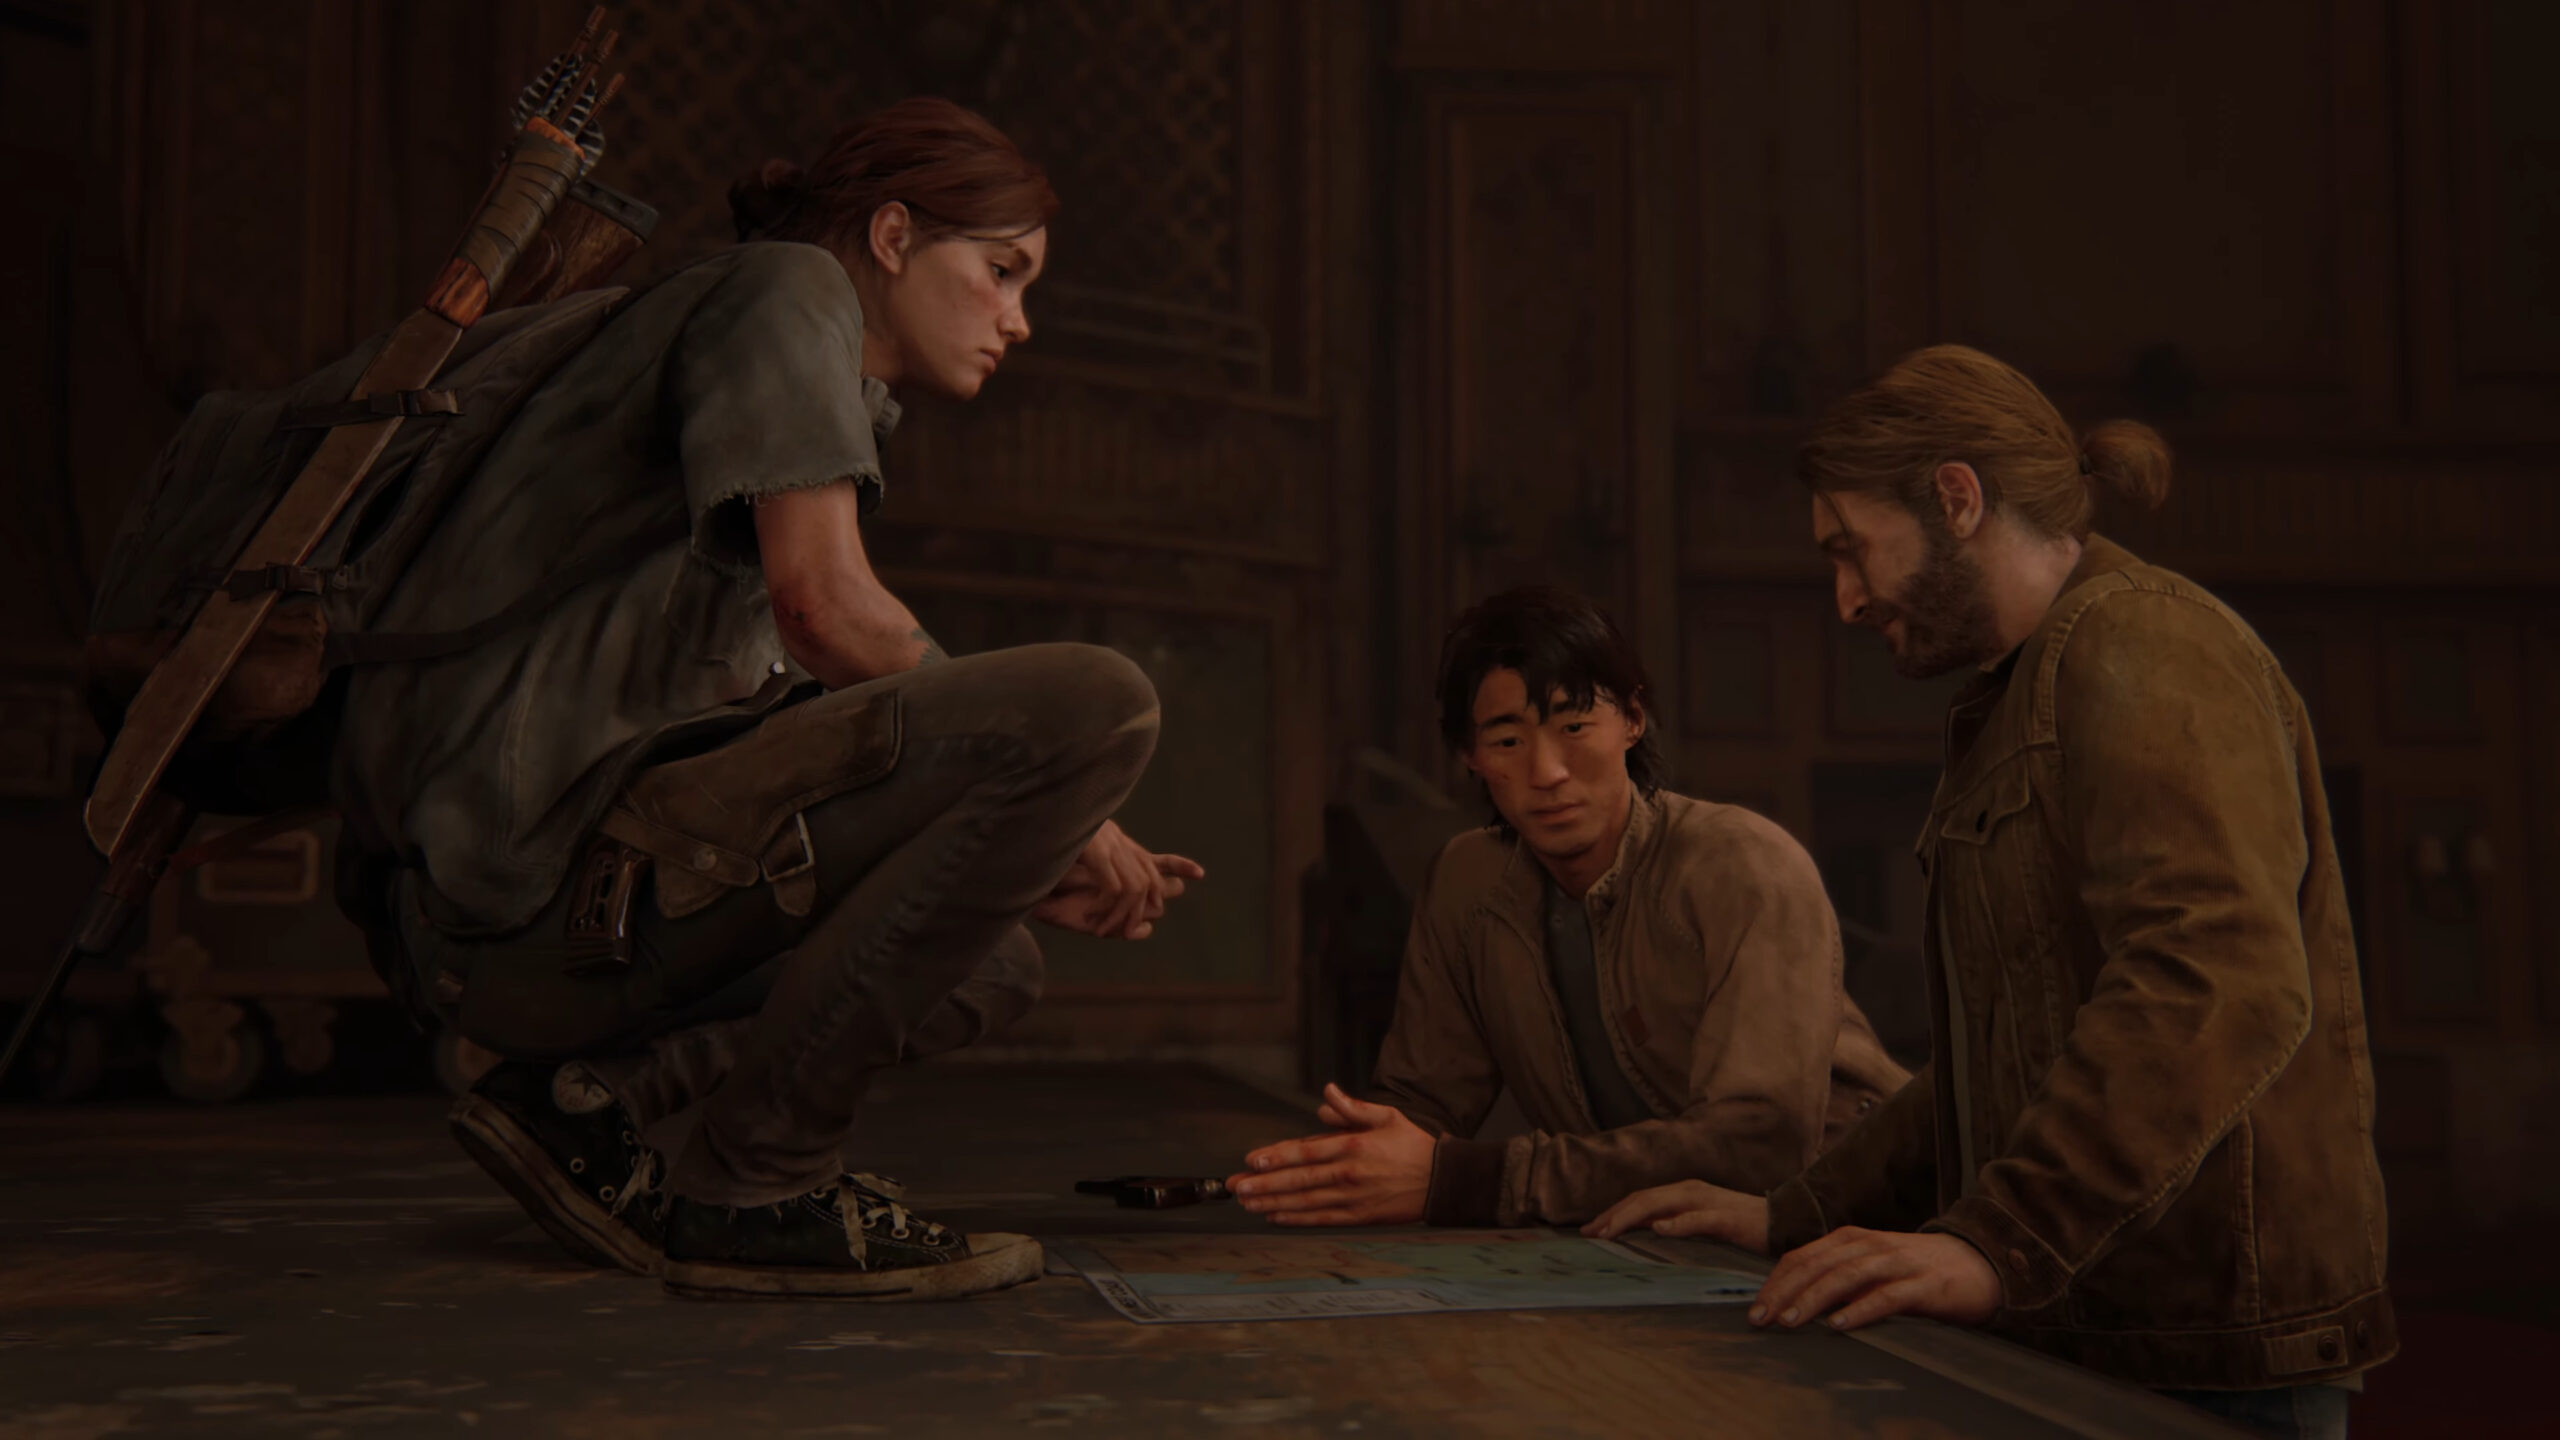 Ellie (Ashley Johnson), Jesse (Stephen Chang) and Tommy (Jeffrey Pierce) map out their next move in The Last of Us Part II (2020), Naughty Dog